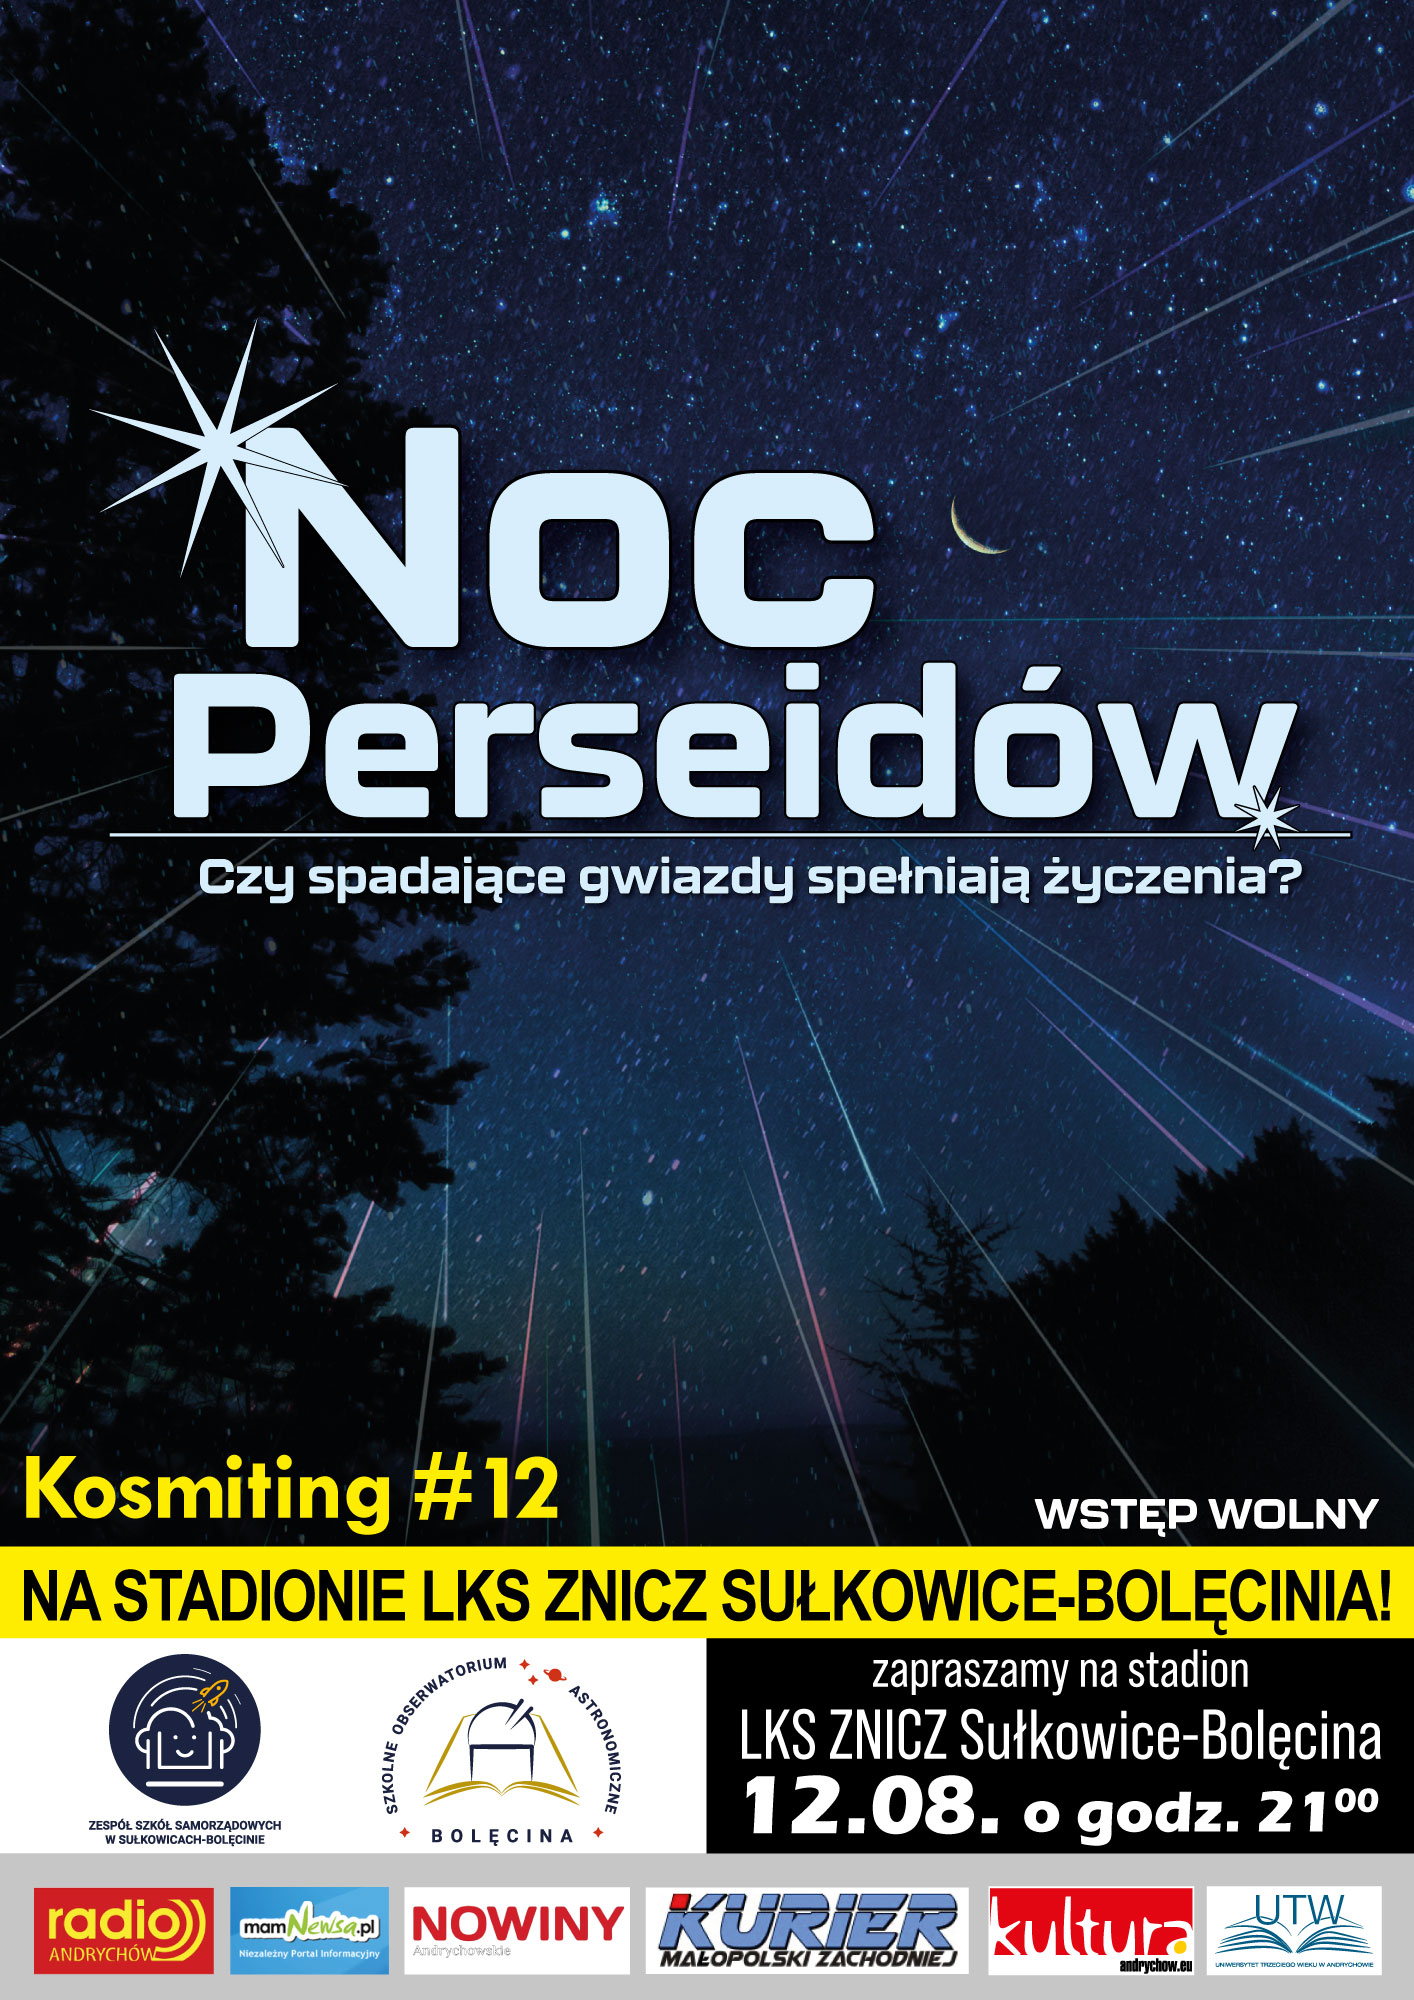 You are currently viewing Kosmiting#12 – NOC PERSEIDÓW